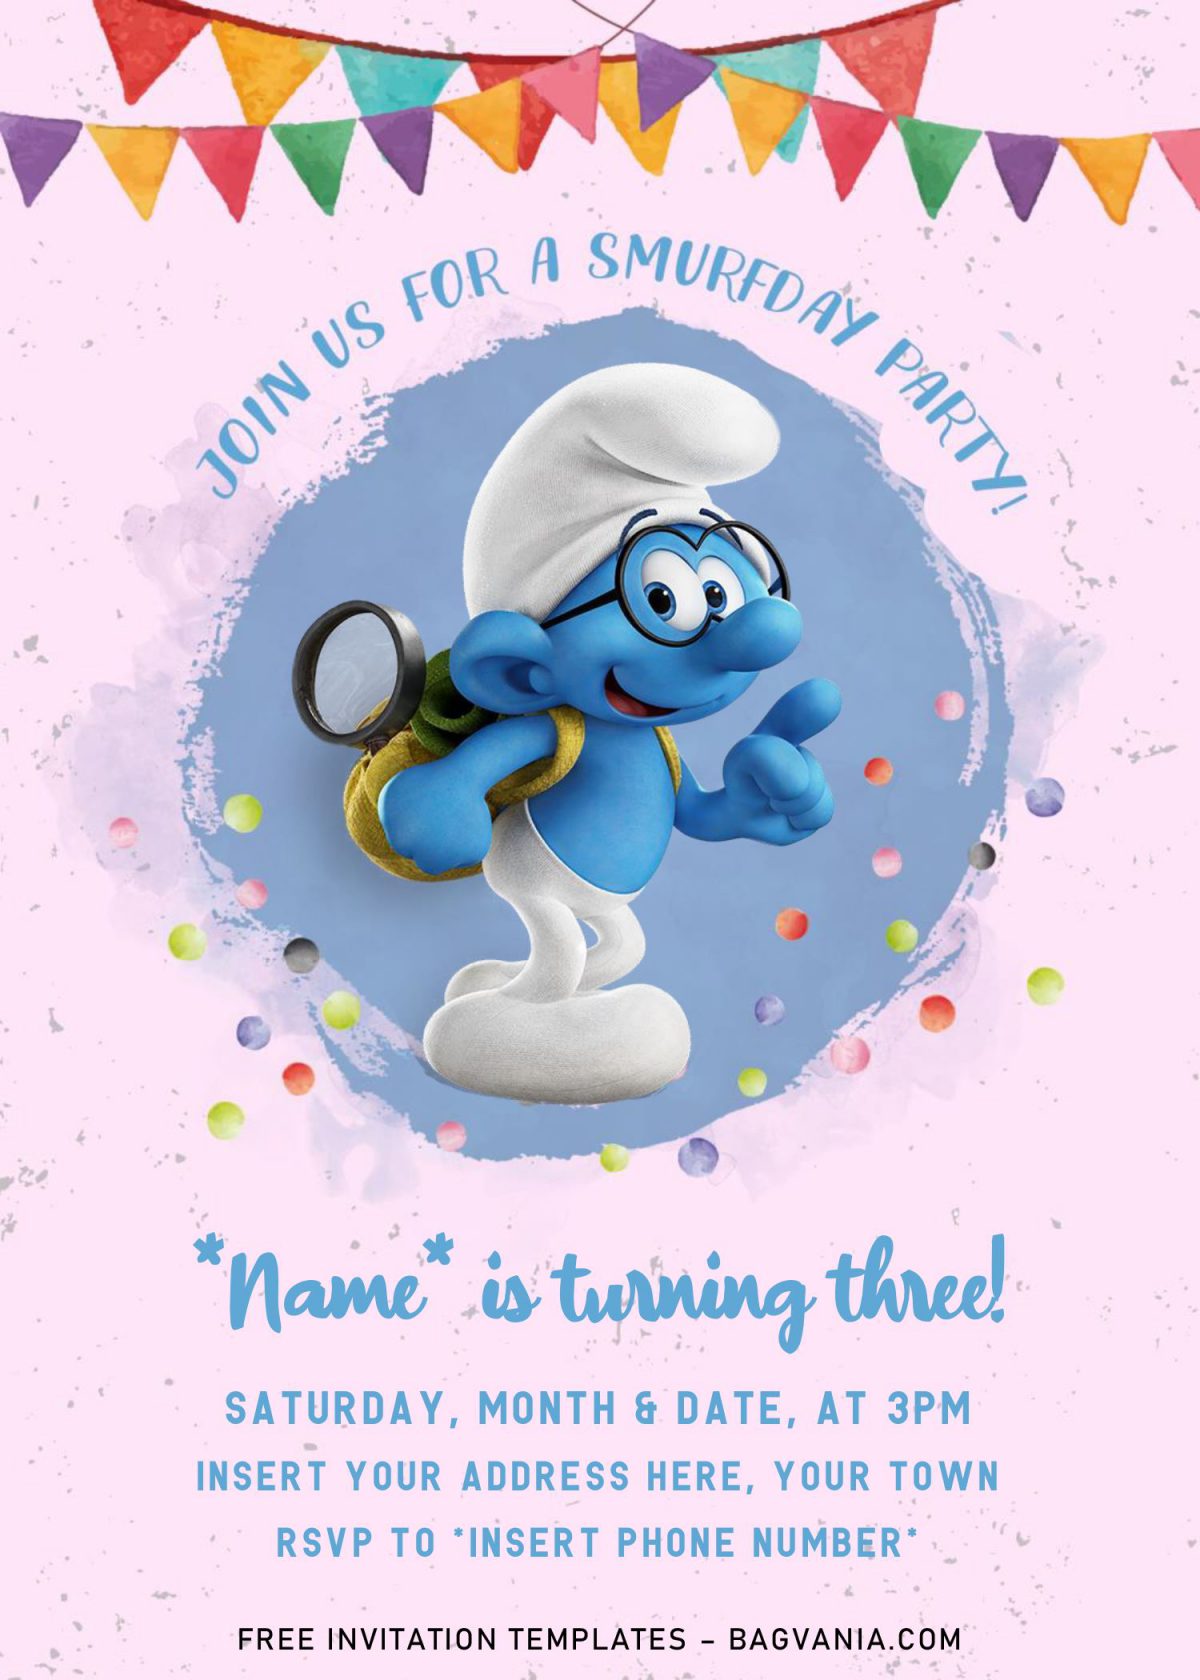 Free Smurf Birthday Invitation Templates For Free and has Brainy Smurf is Wearing Background